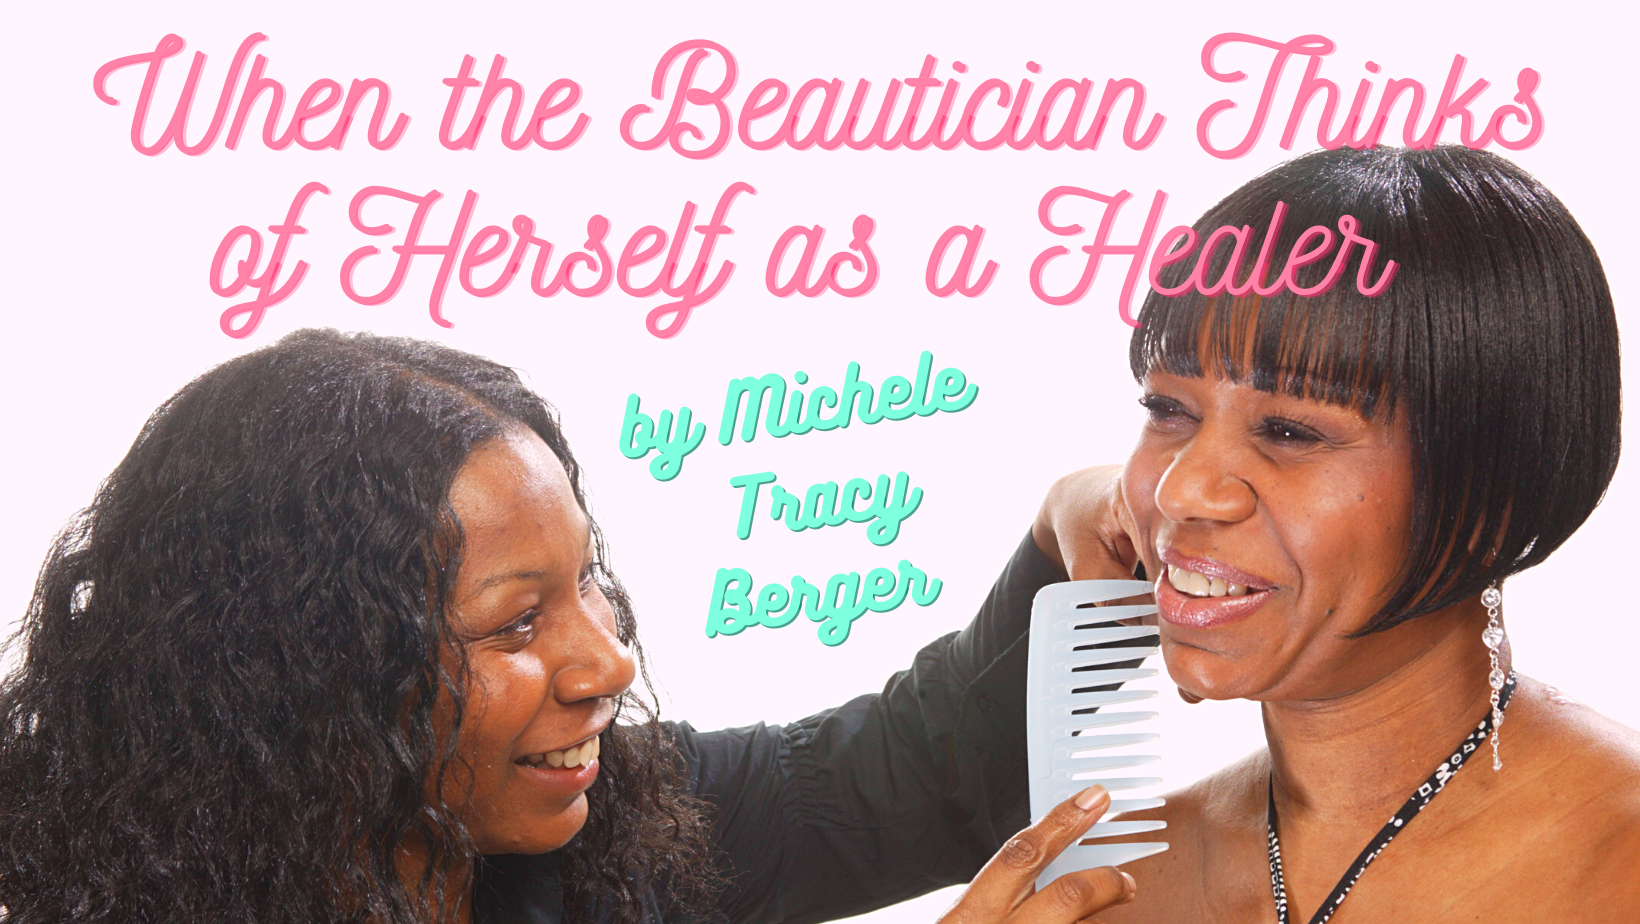 Title Card for When the Beautician Thinks of Herself as a Healer by Michele Tracy Berger. The title appears in pink script and the author name appears in aqua script over a photo of two Black women. One has long wavy hair and is using a white comb to style the other's hair into a short straight bob.